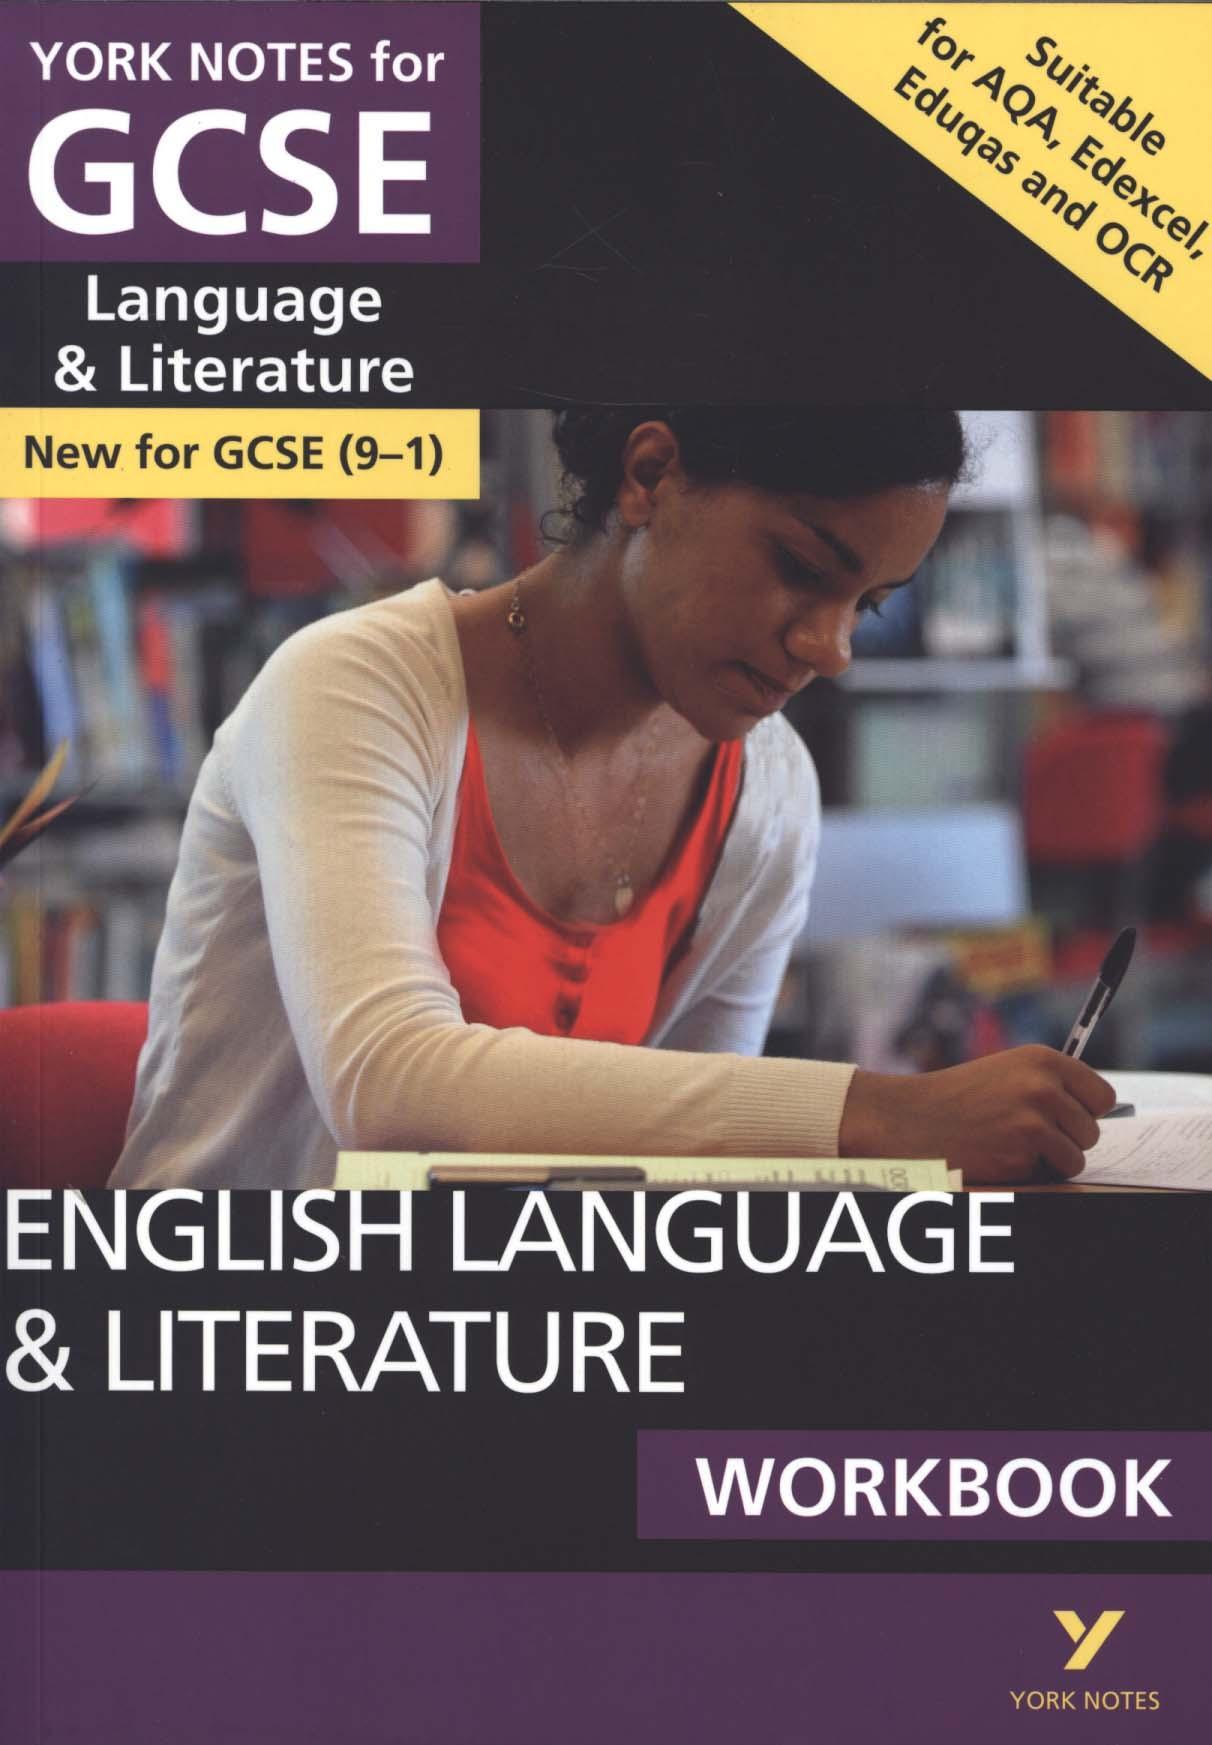 English Language and Literature Workbook: York Notes for GCS